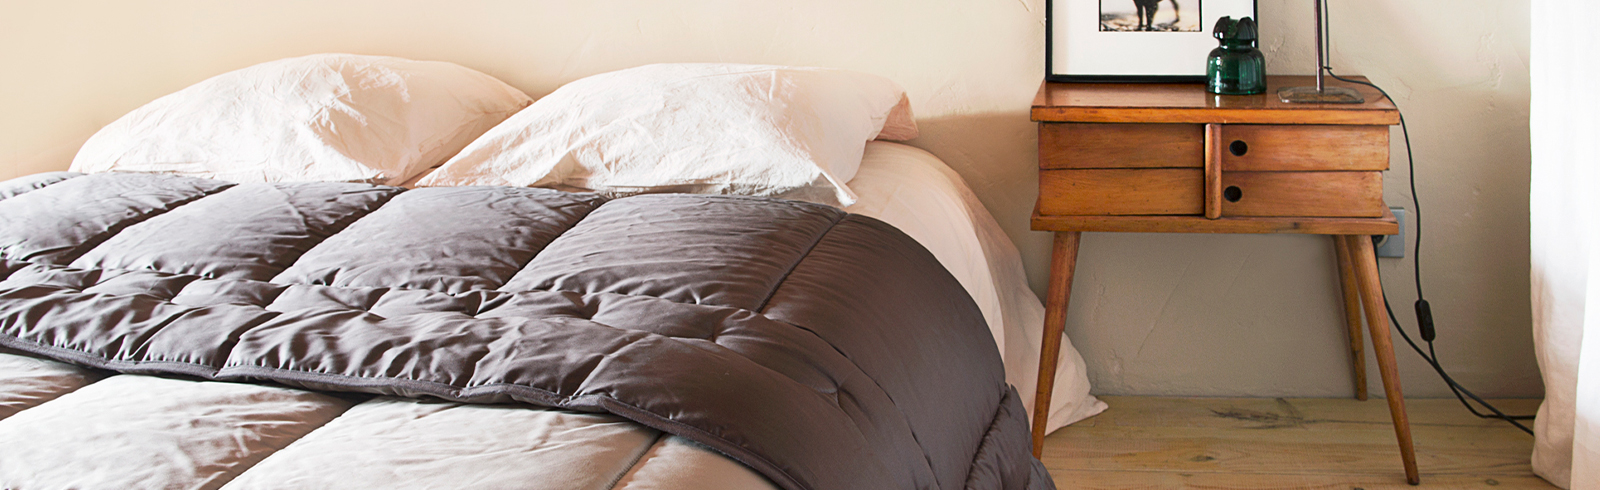 Eiderdown & Bed cover